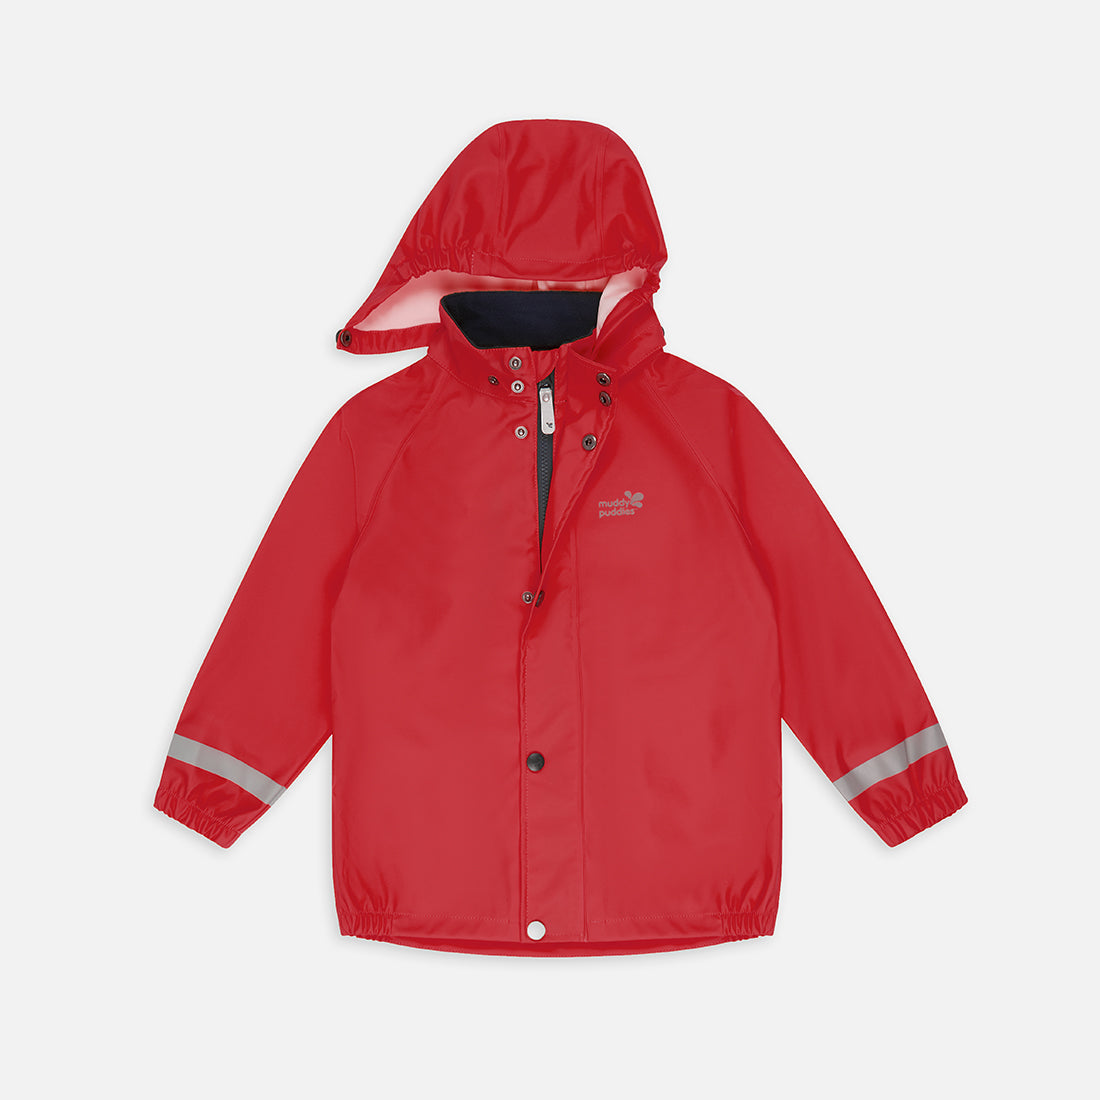 Rainy Day Jacket Red Recycled - Muddy Puddles Kids Waterproofs